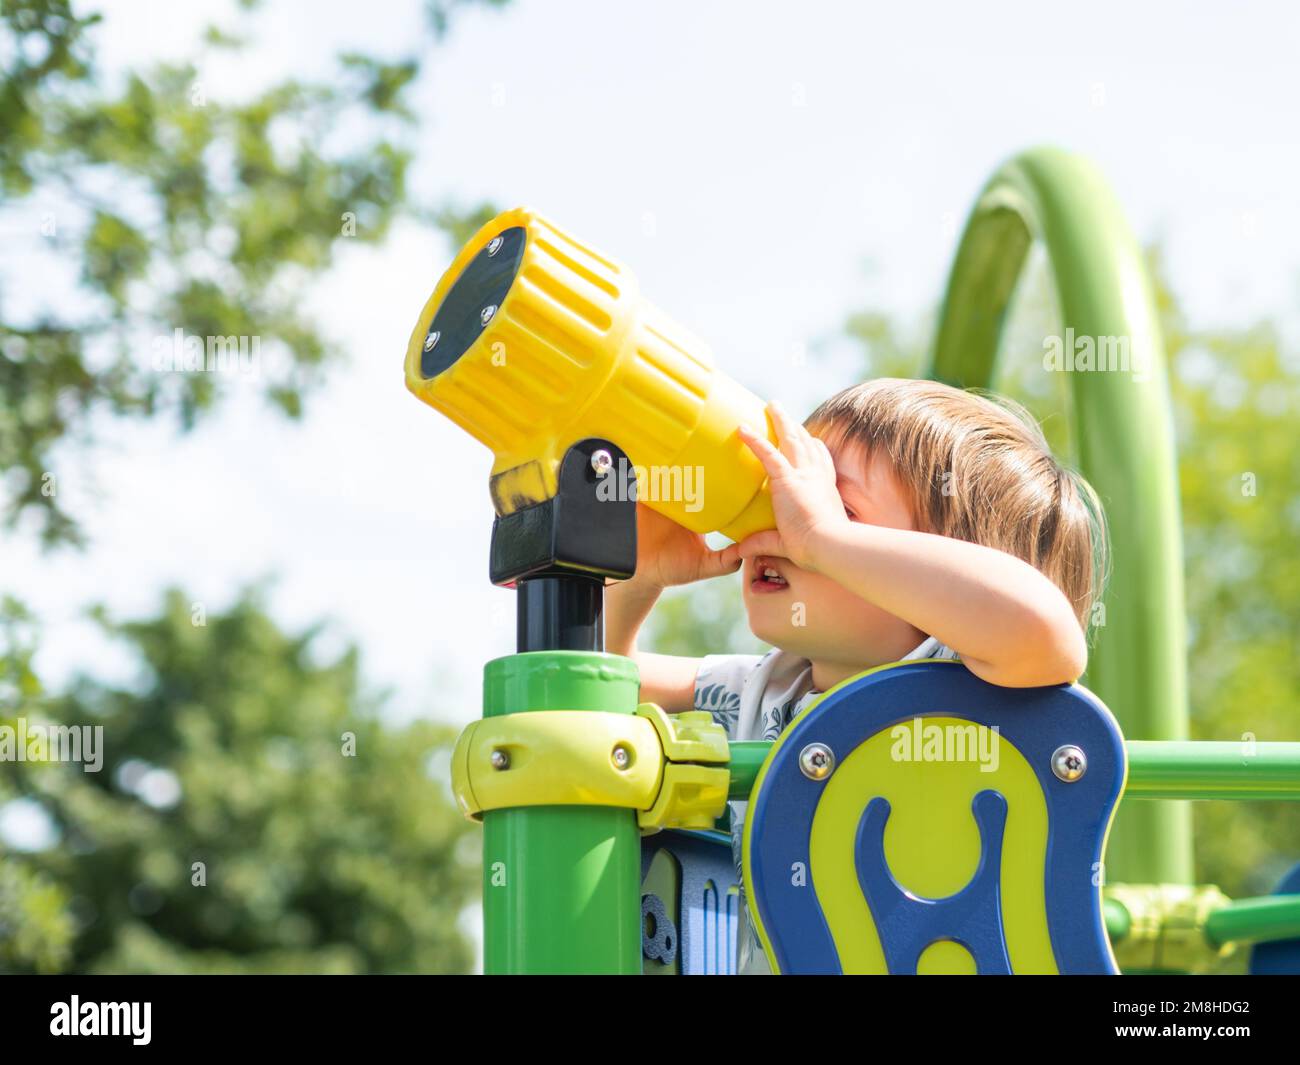 Little kid looks in toy telescope on outdoor playground. Leisure activity for curious children. Summer fun. Stock Photo